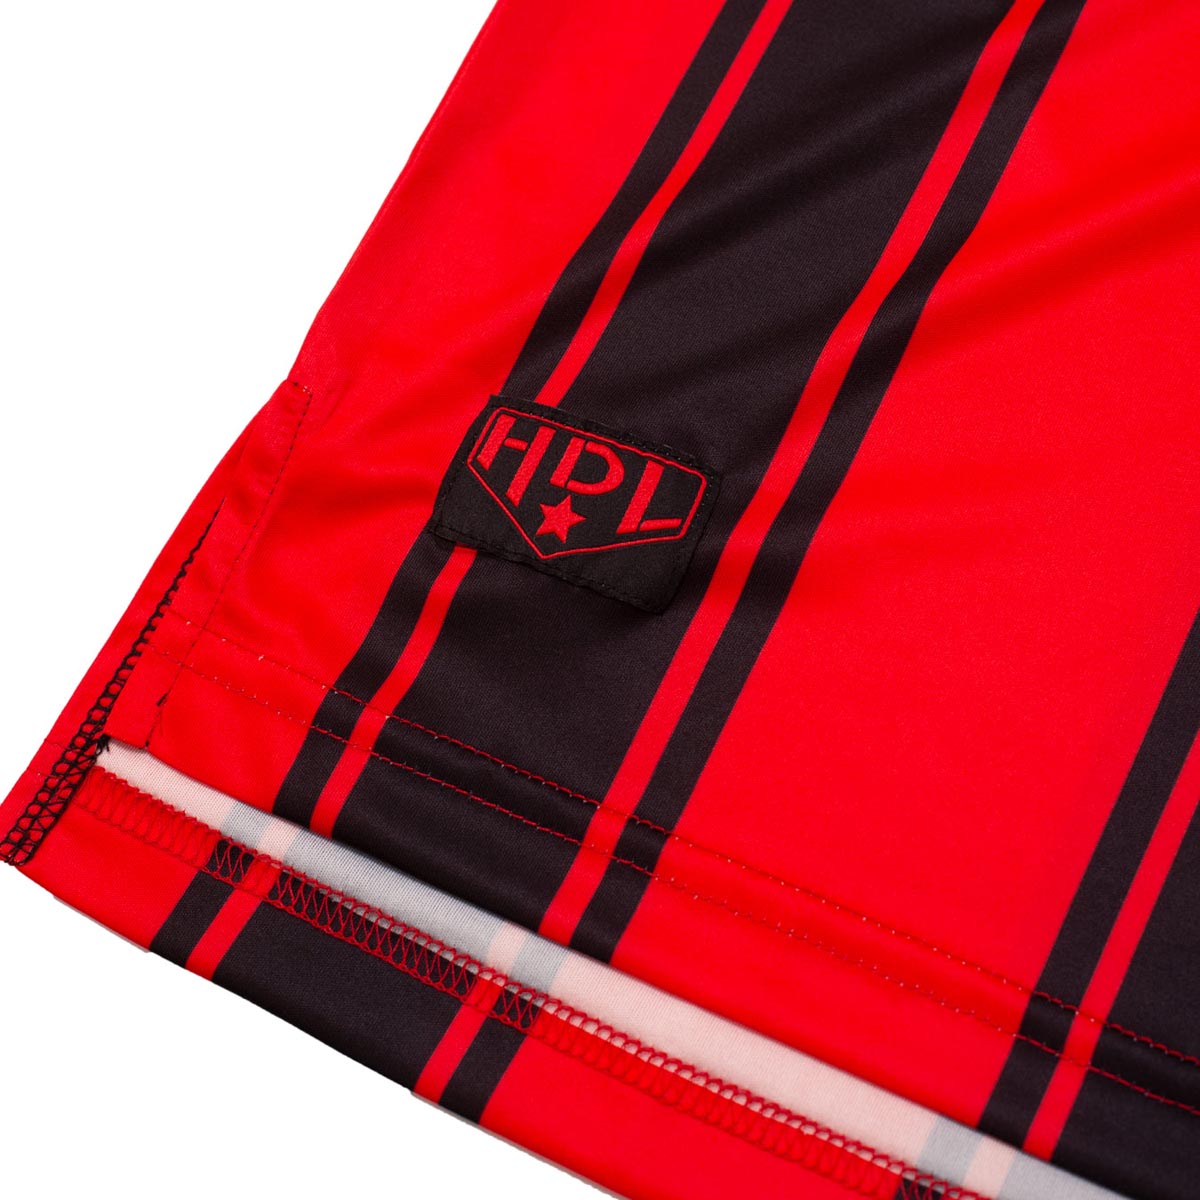 Hoddle Football Jersey - Red/Black image 4